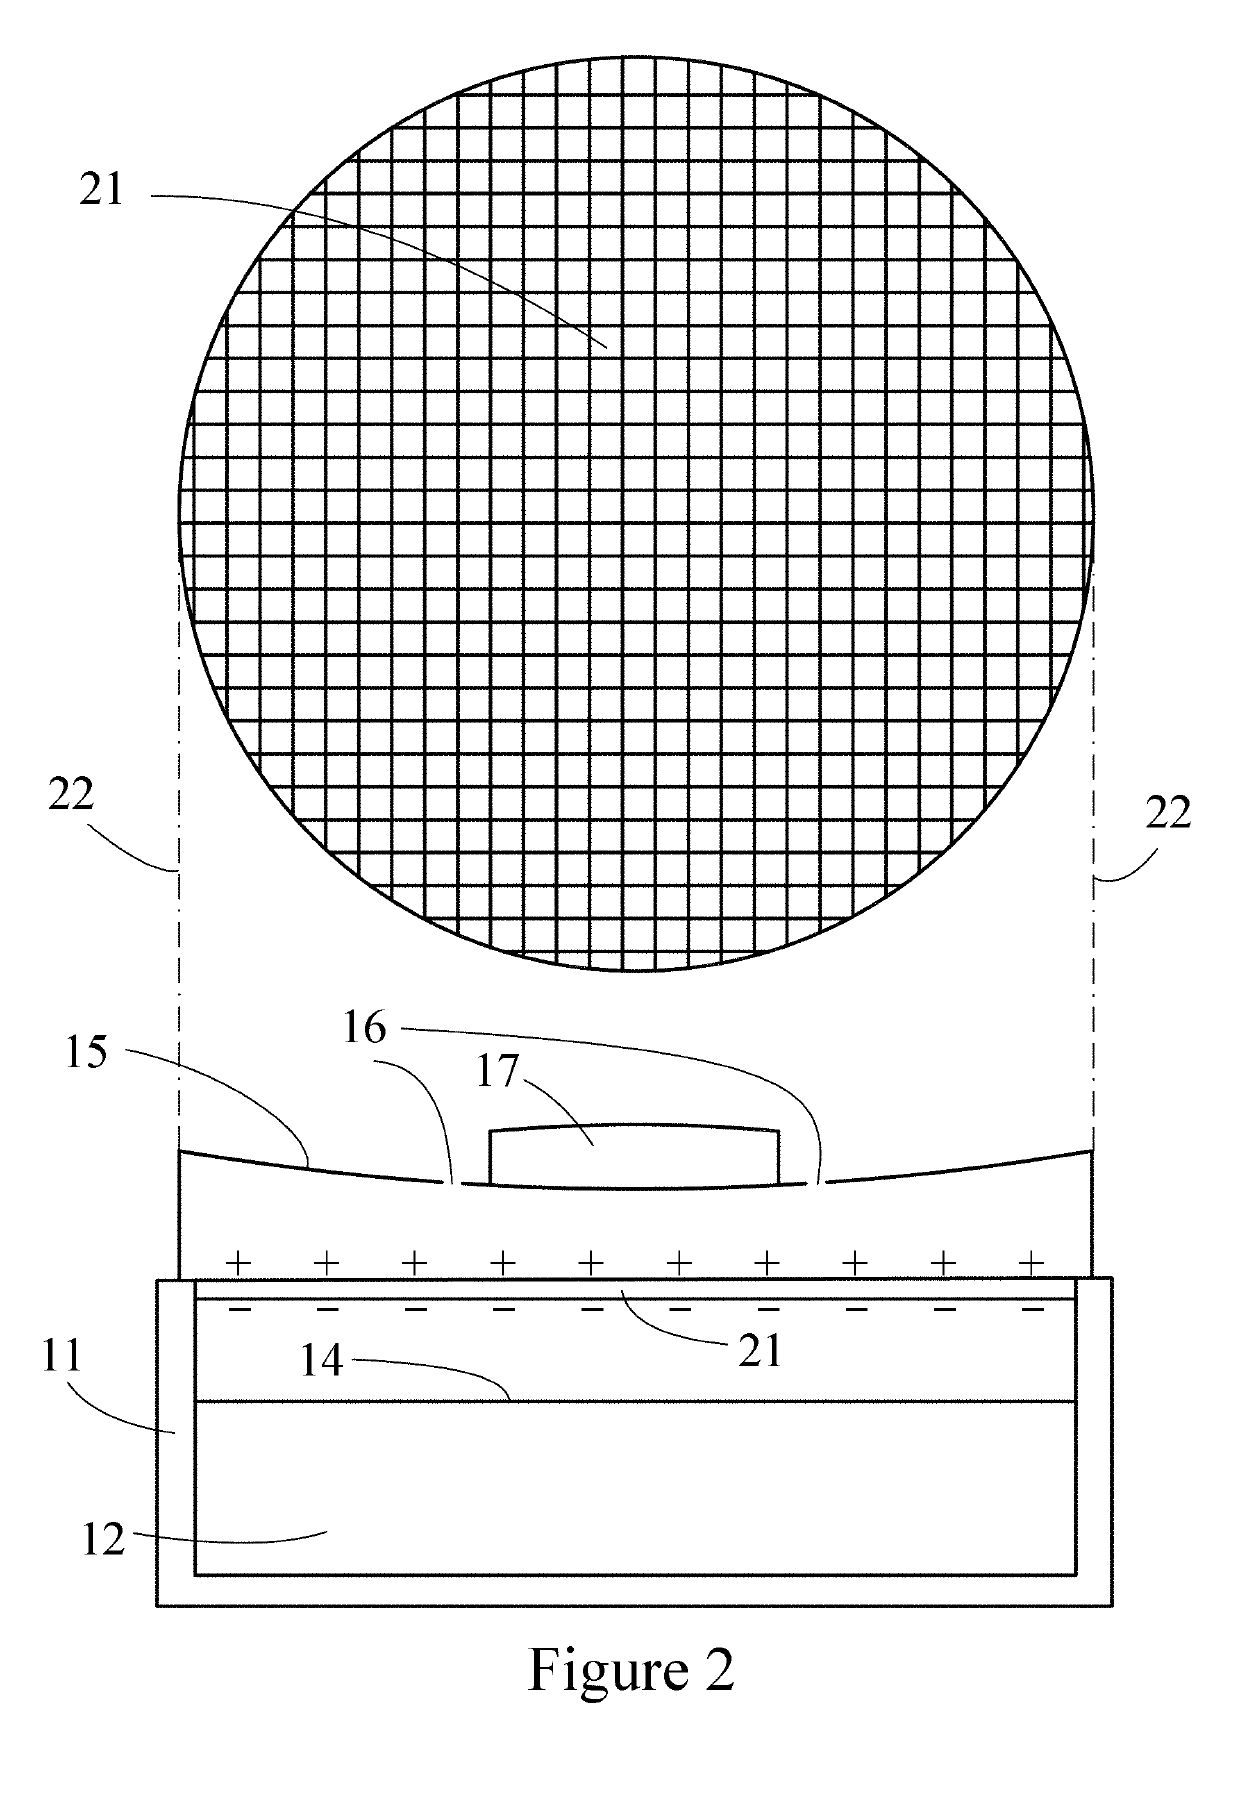 Skeeter EaterTM Apparatus and Method for Concentrating then Killing Mosquitos